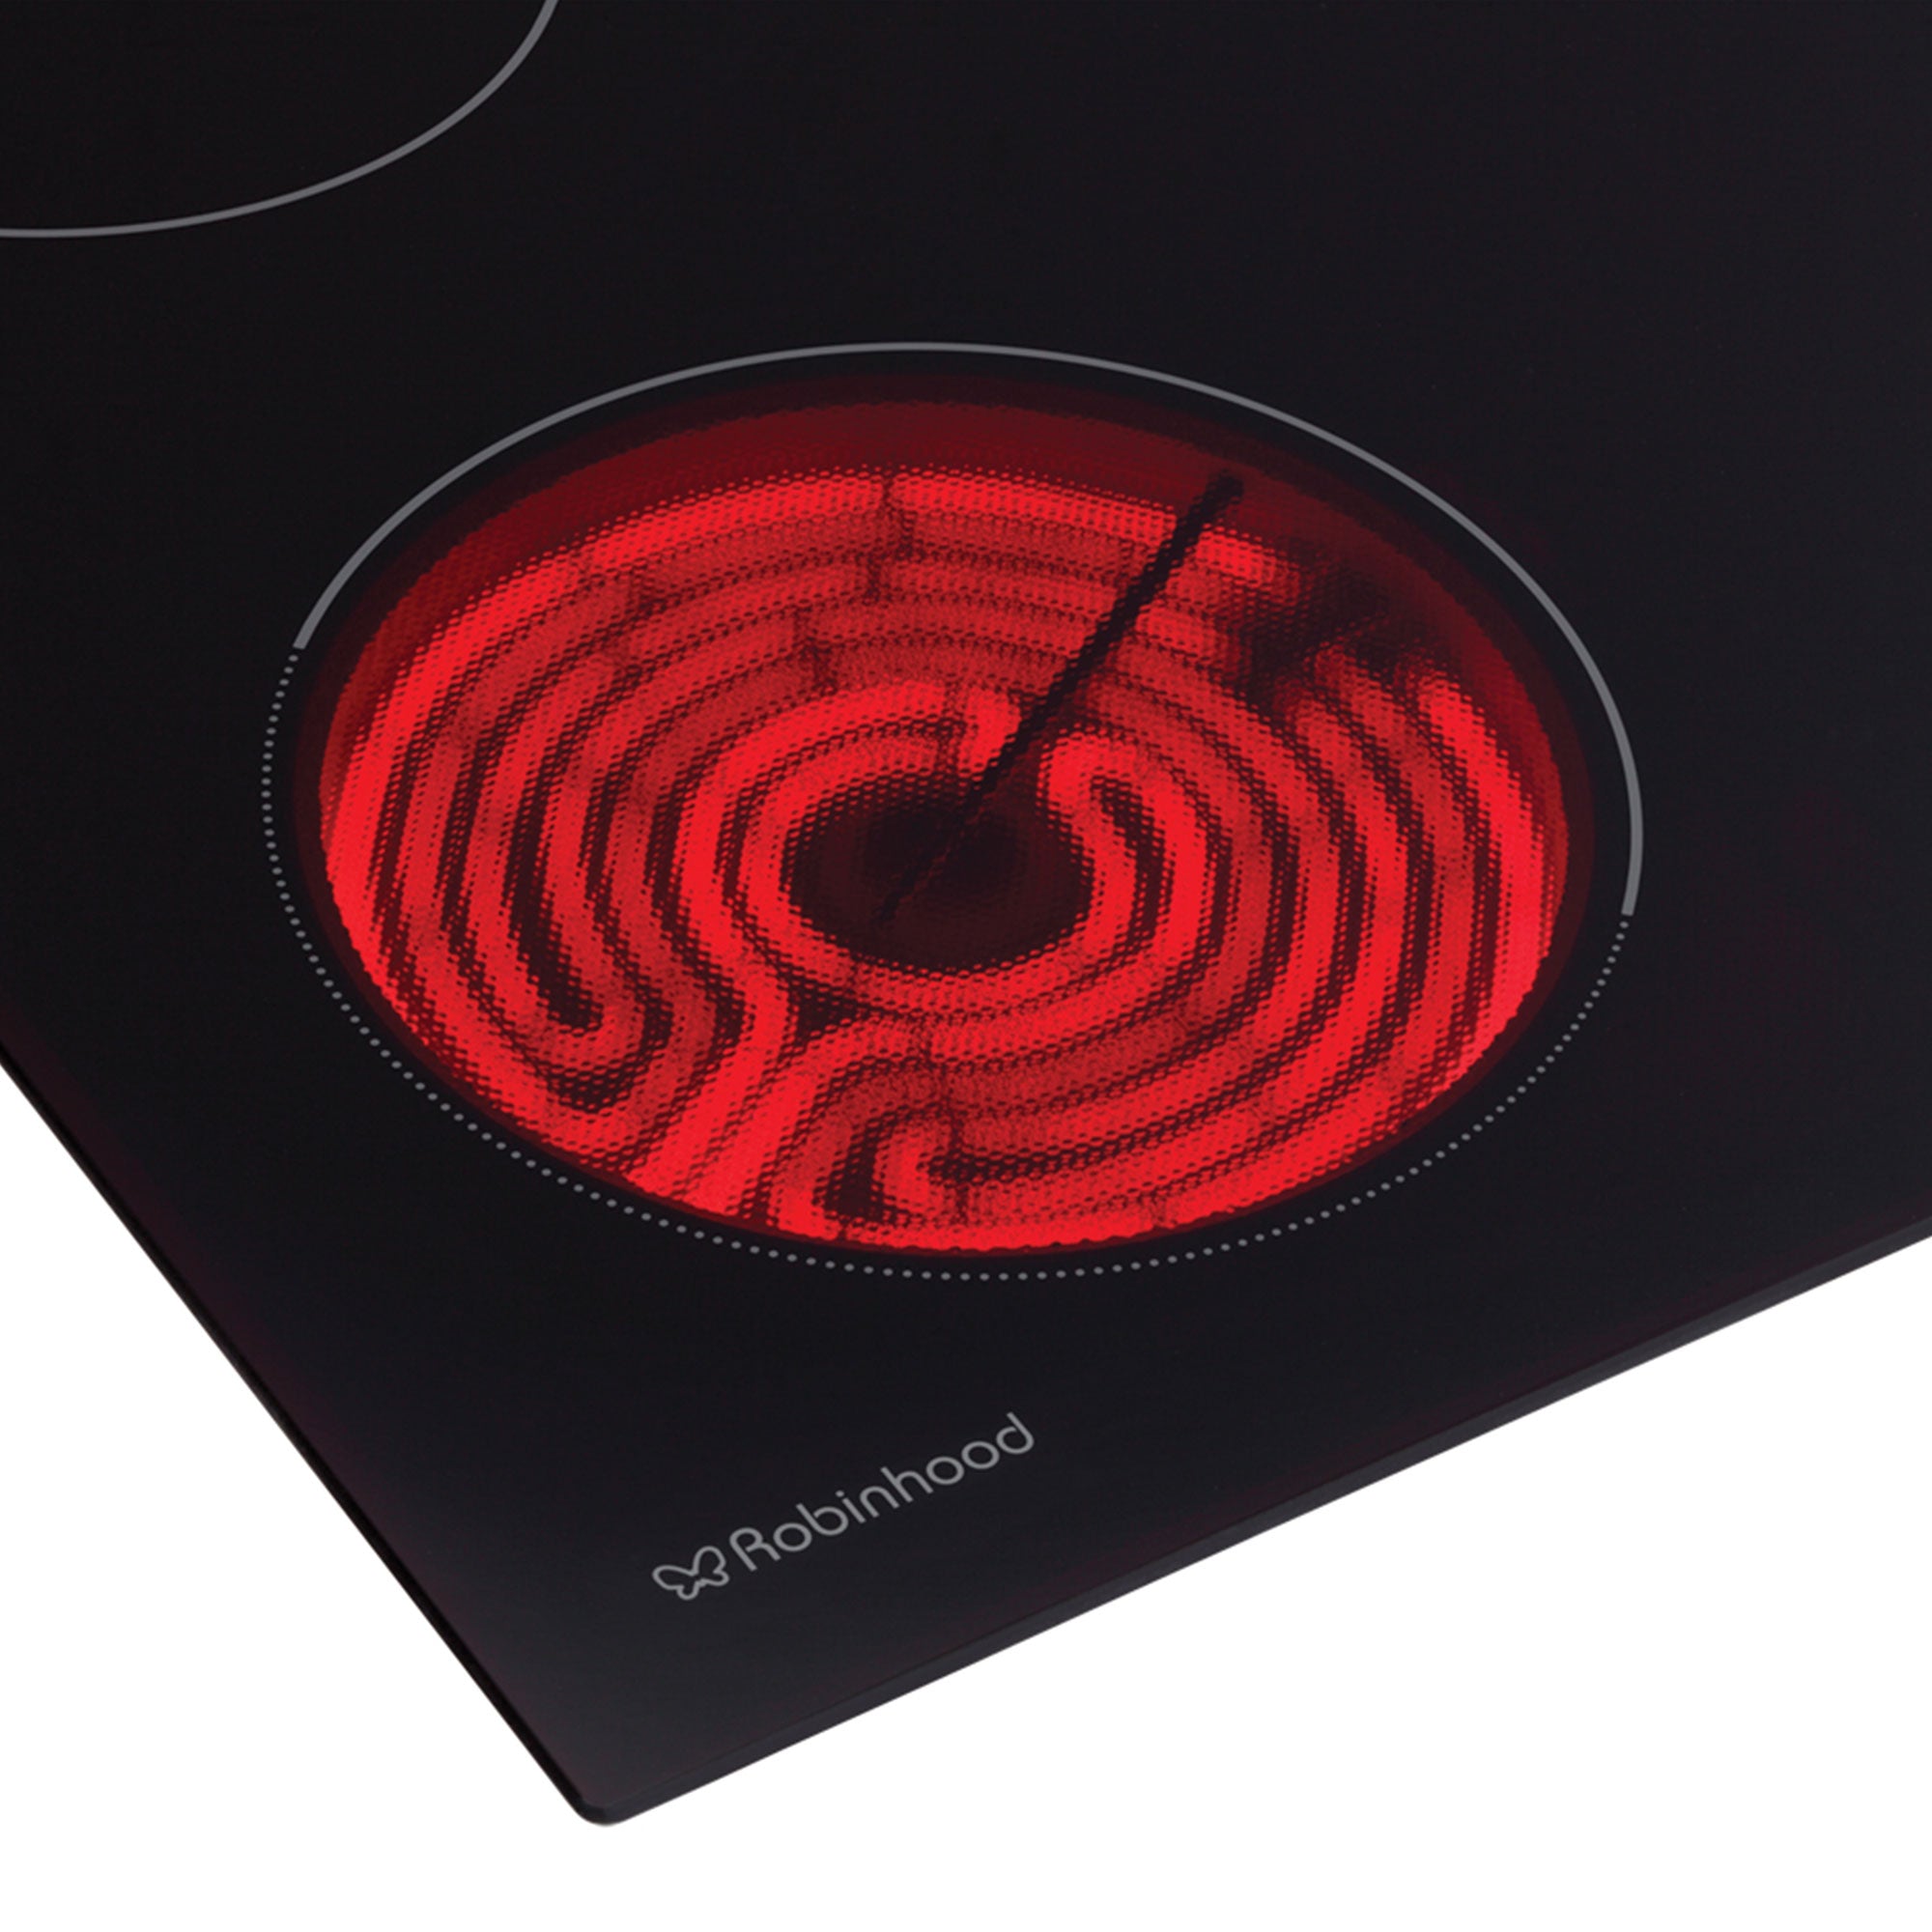 4 zone ceramic turn-switch electric cooktop